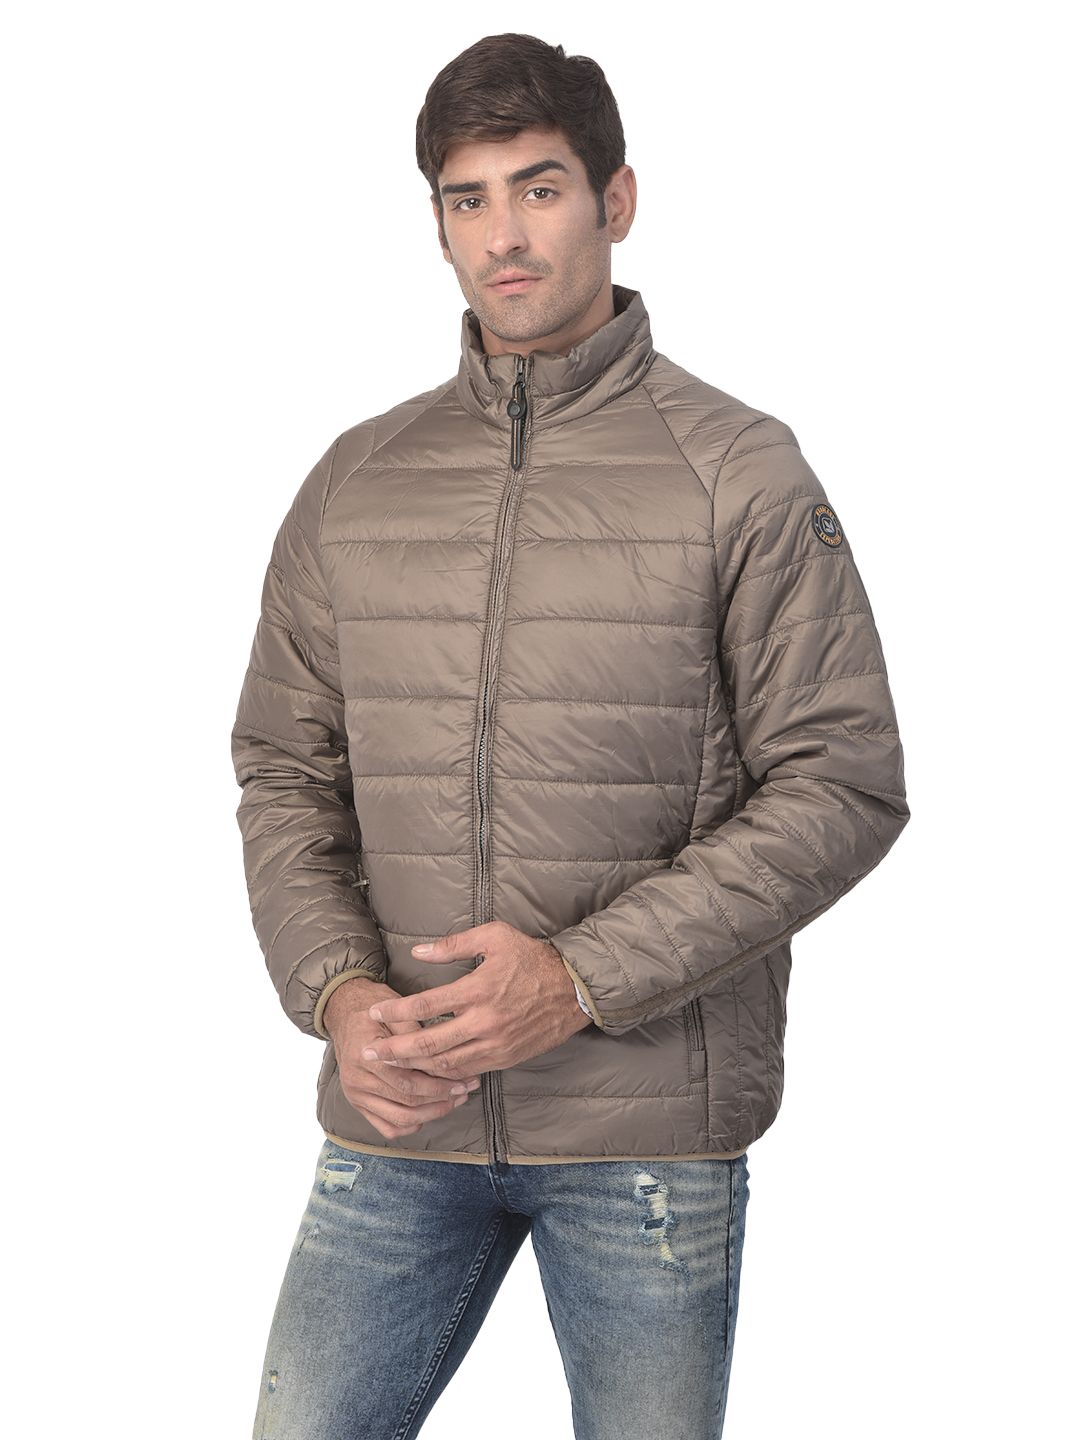 Covert green quilted jacket